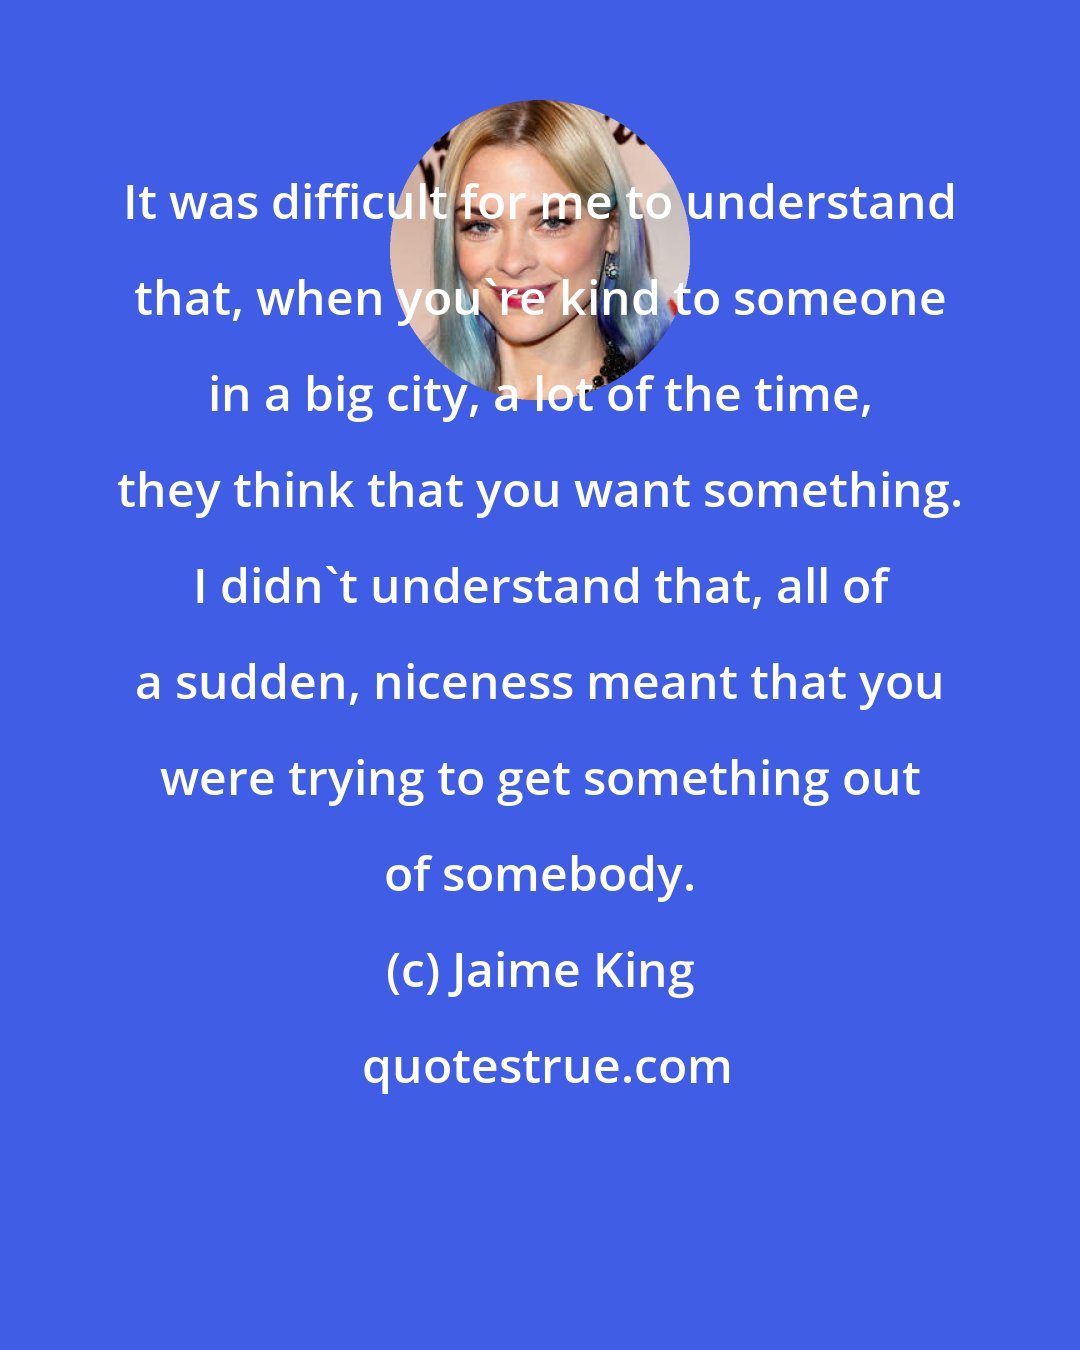 Jaime King: It was difficult for me to understand that, when you're kind to someone in a big city, a lot of the time, they think that you want something. I didn't understand that, all of a sudden, niceness meant that you were trying to get something out of somebody.